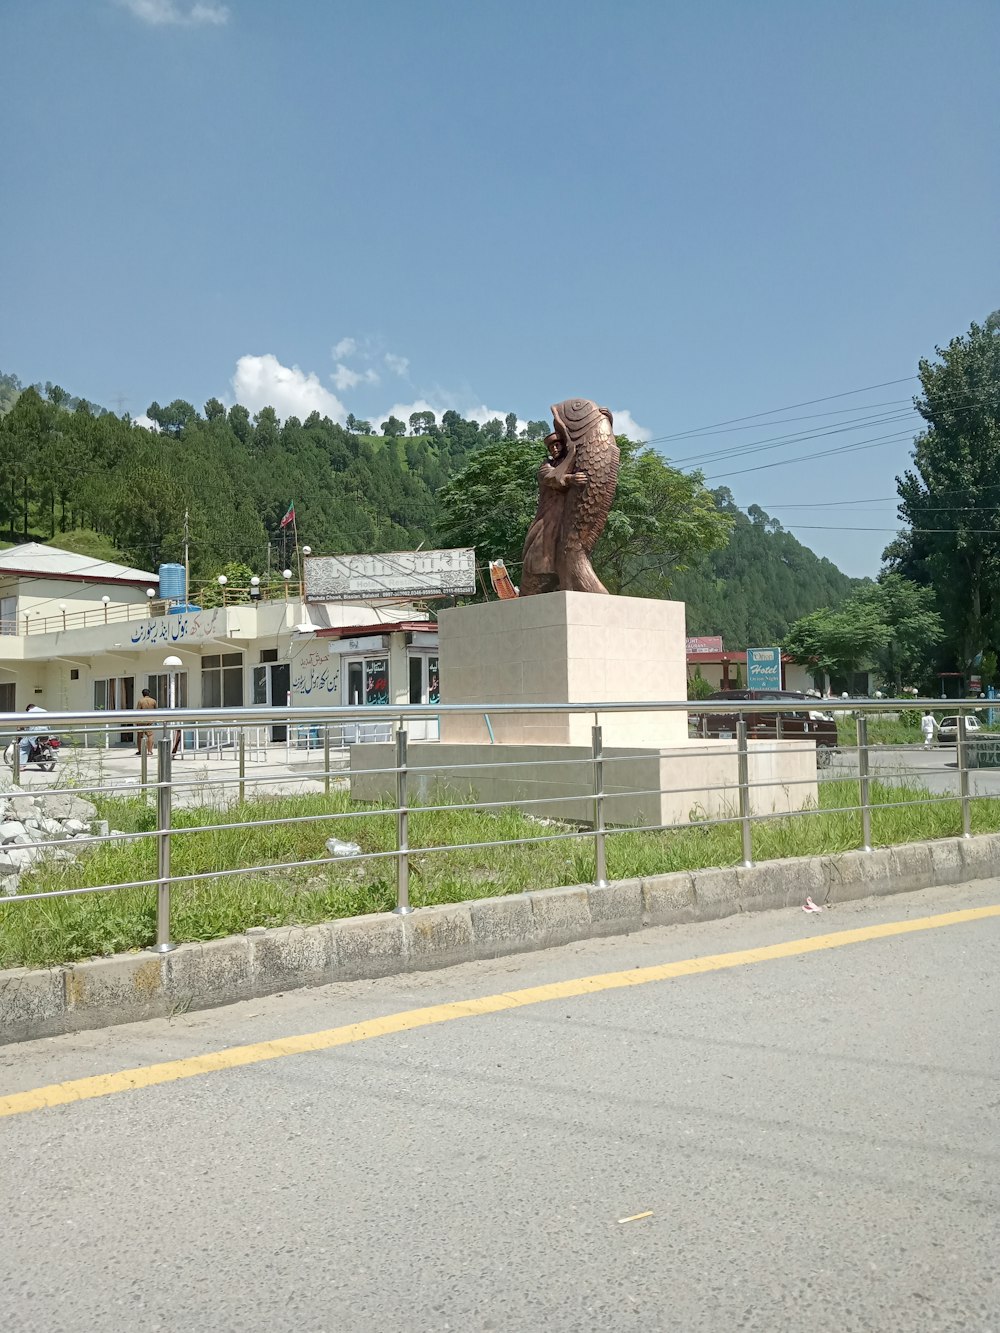 a large statue of a bear on the side of a road